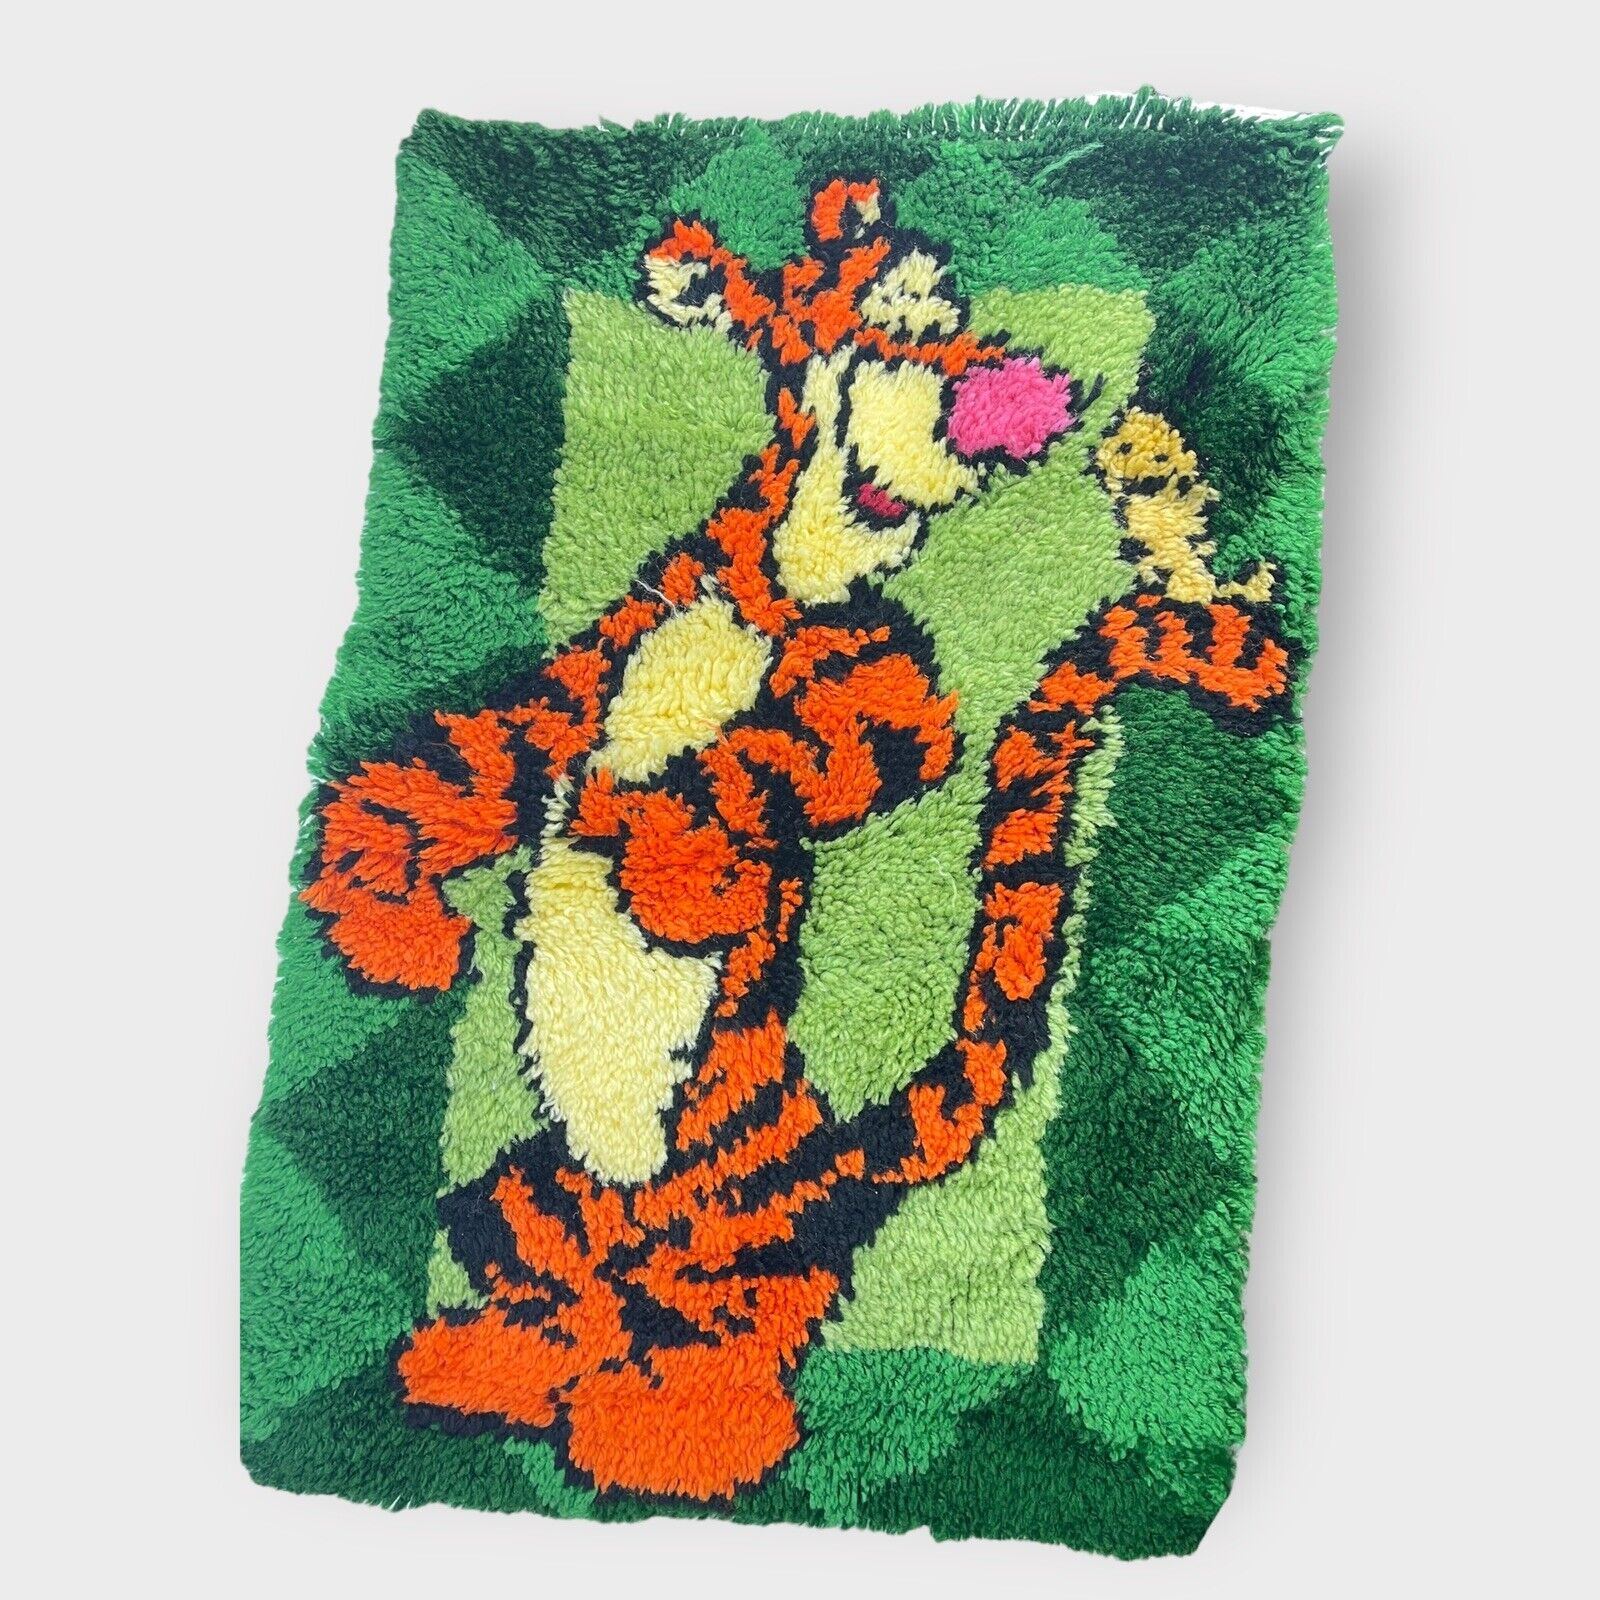 VTG Tigger Winnie the Pooh Latch Hook Wall Hanging Completed Green Nursery Decor